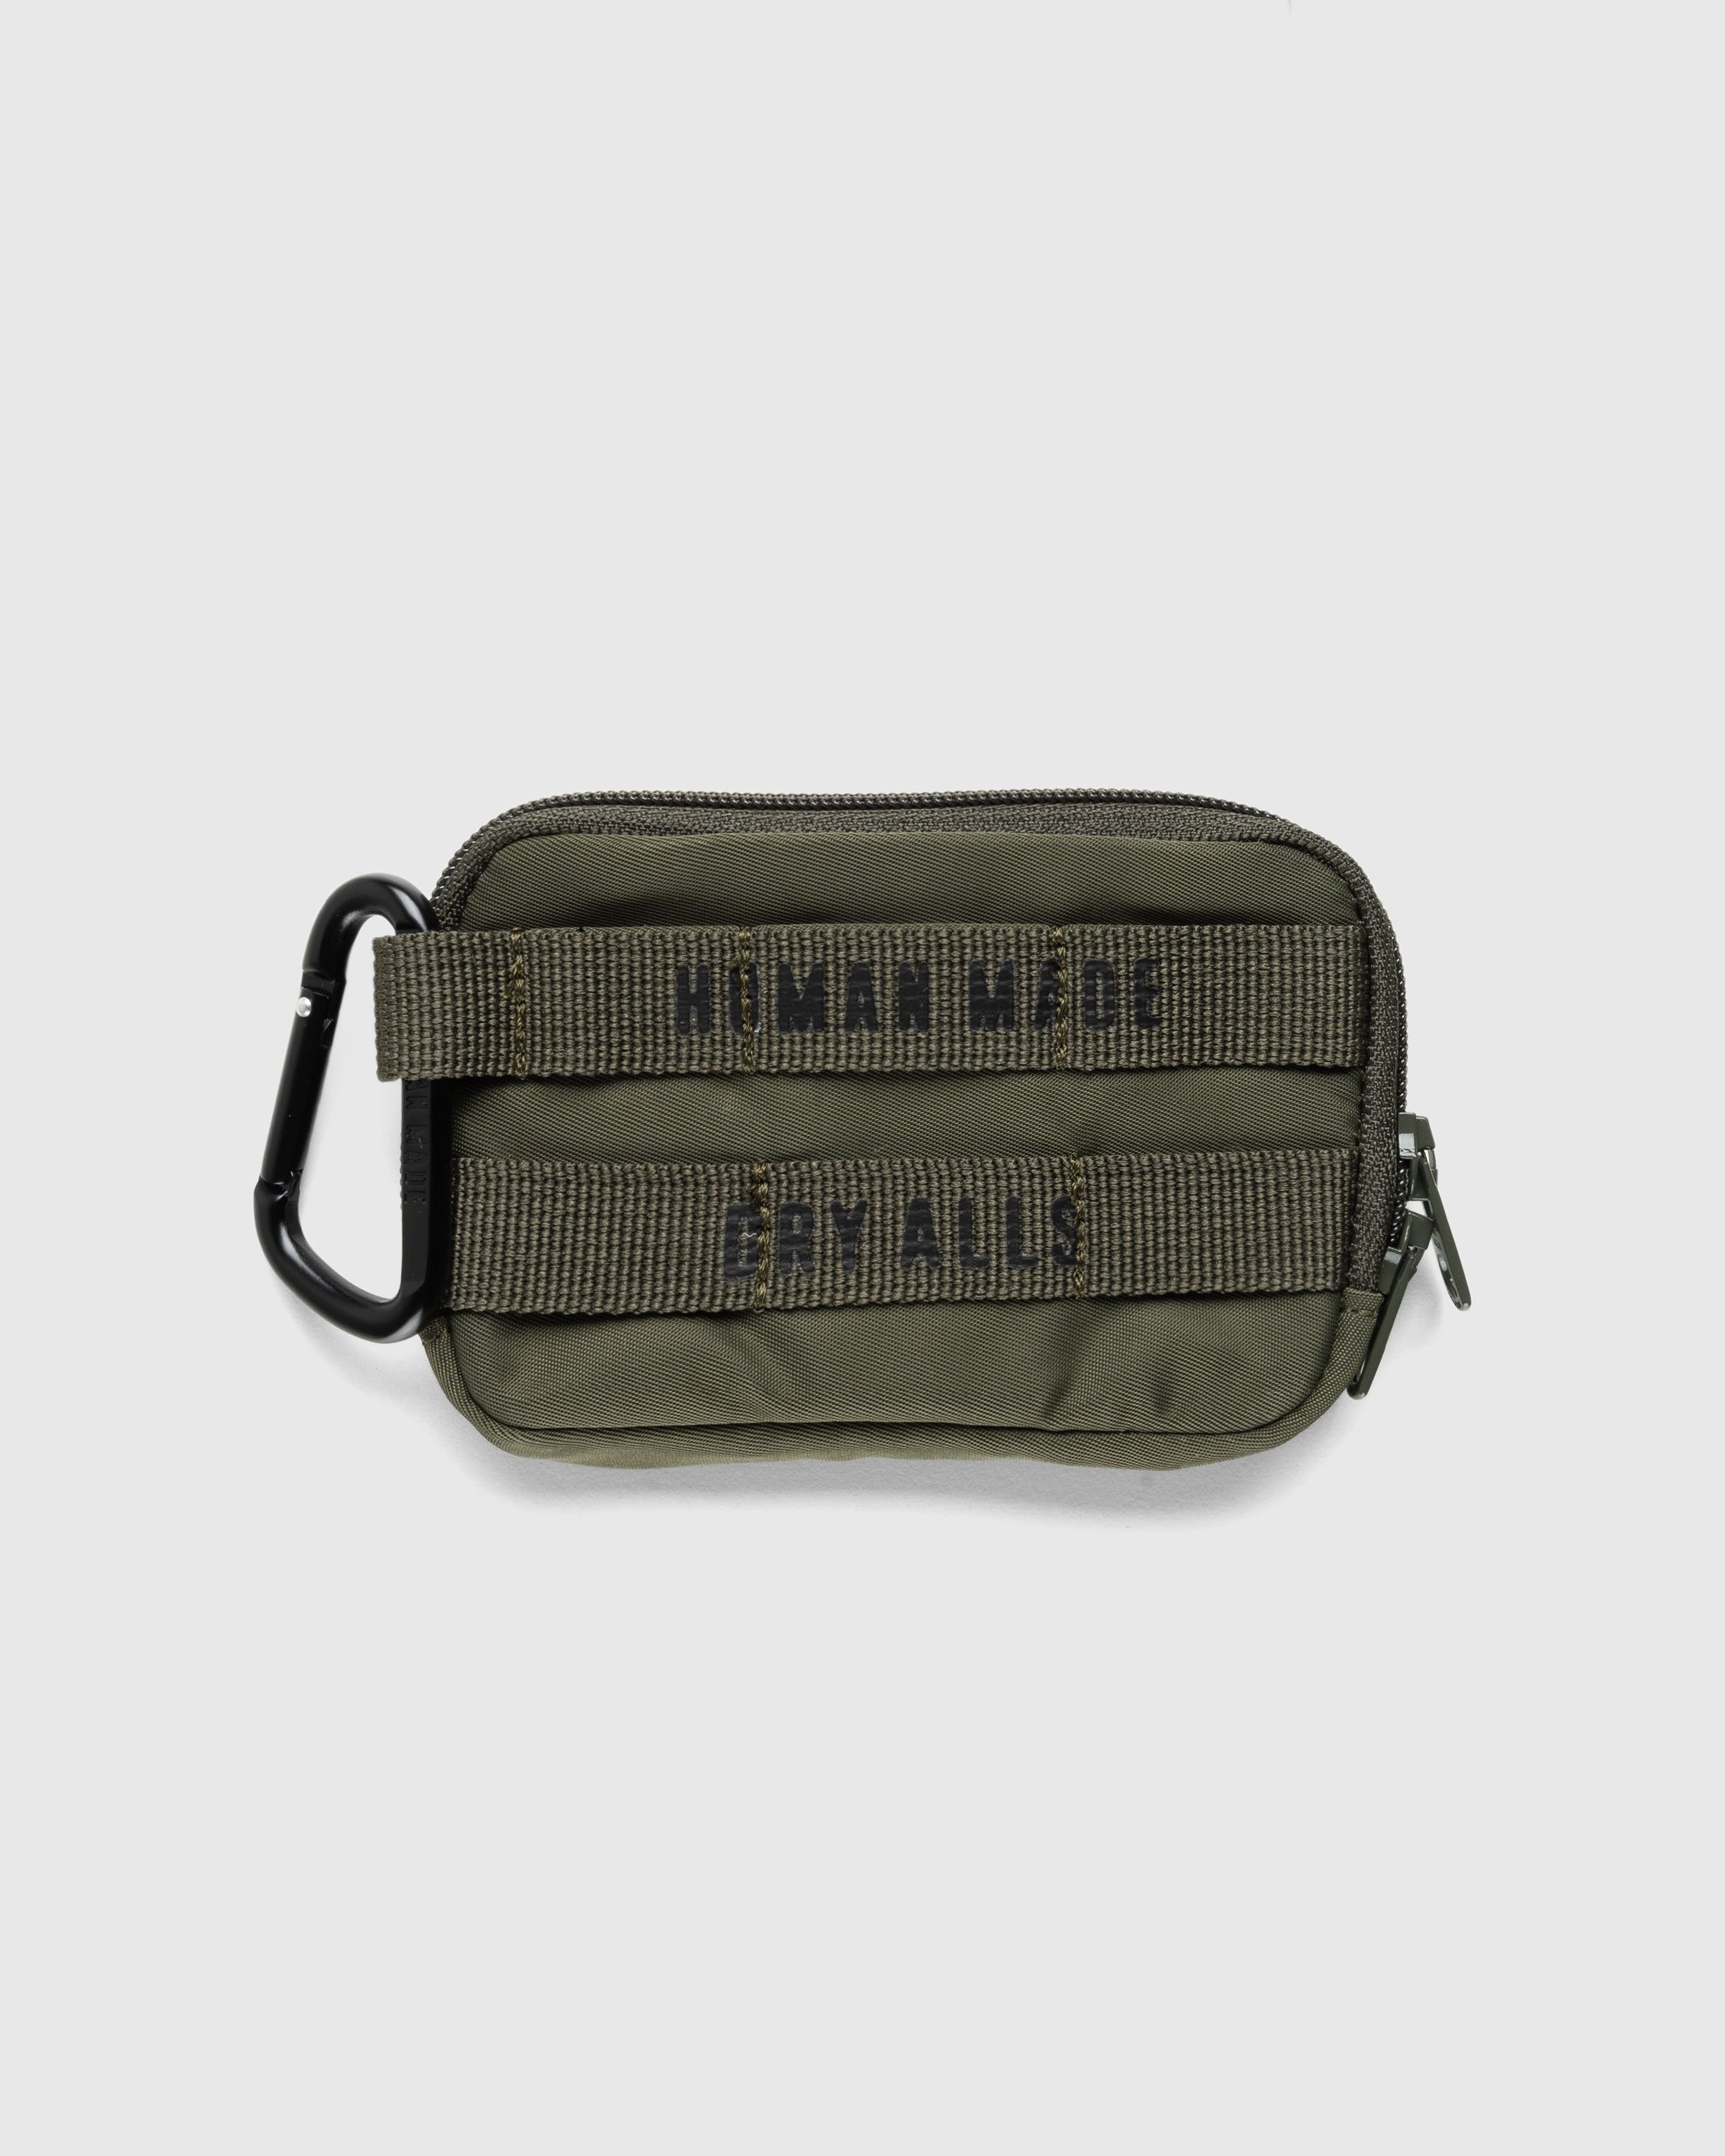 Human Made – MILITARY CARD CASE Olive Drab | Highsnobiety Shop